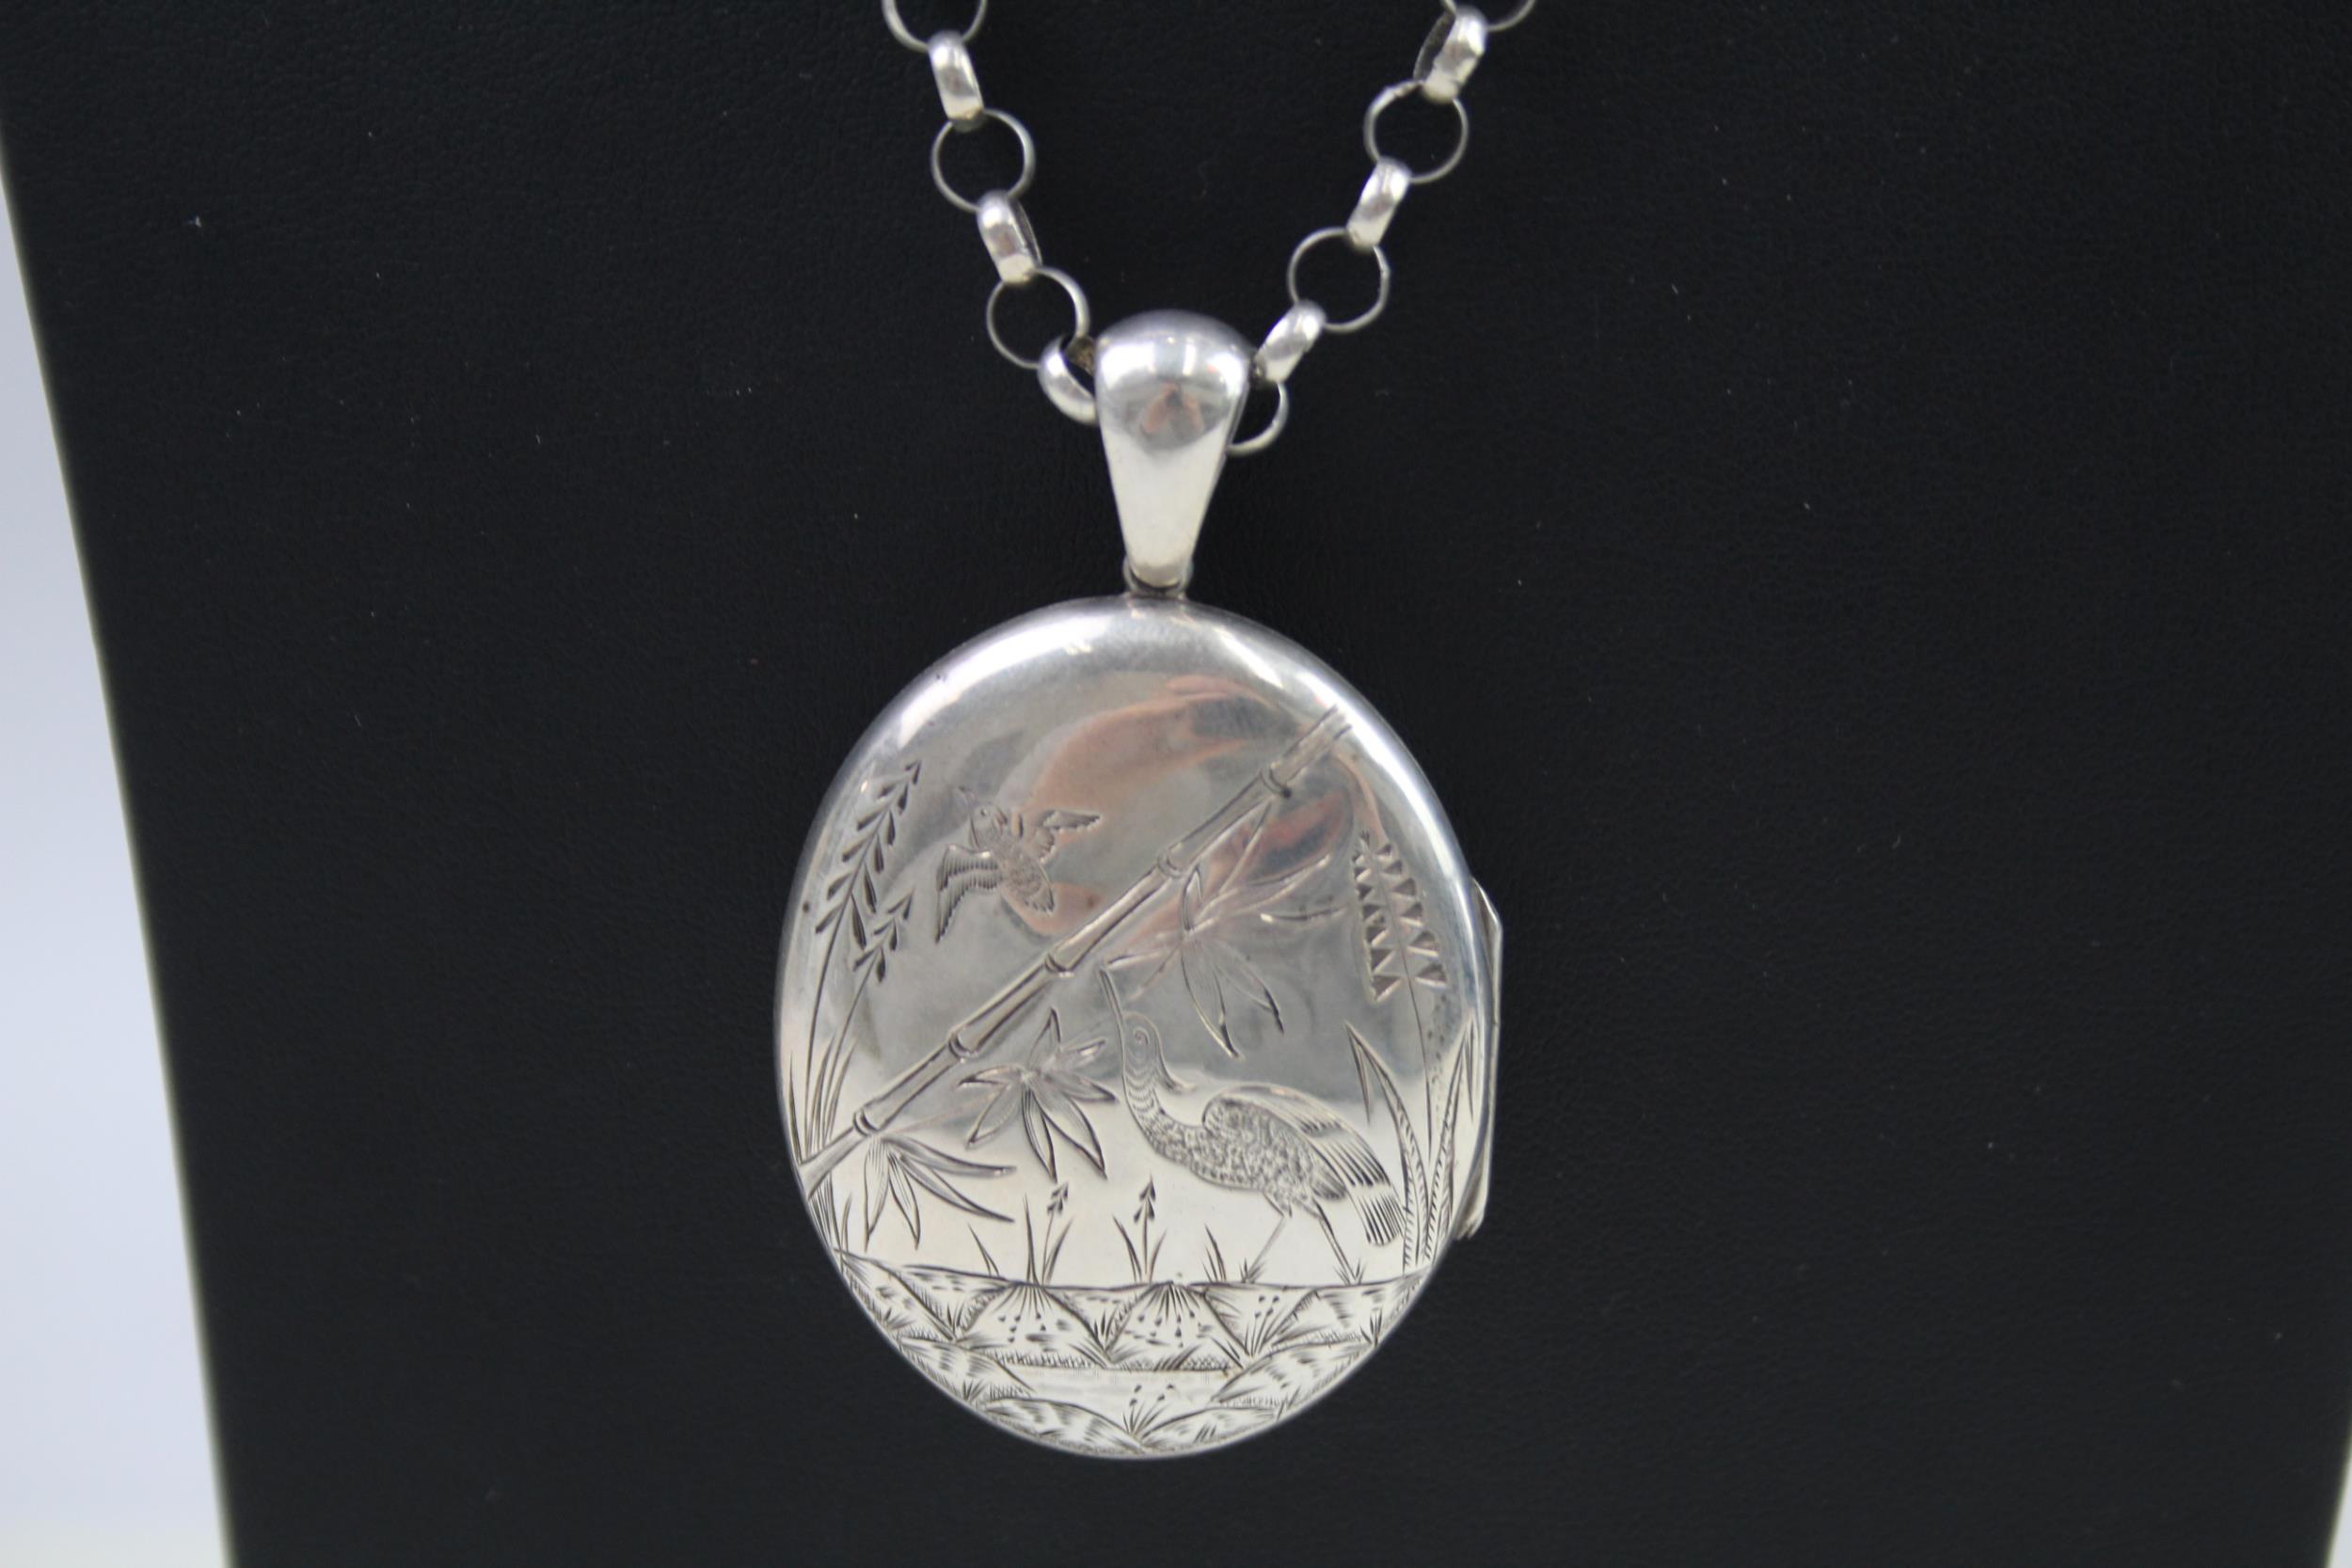 Silver aesthetic movement locket pendant necklace (37g) - Image 3 of 5